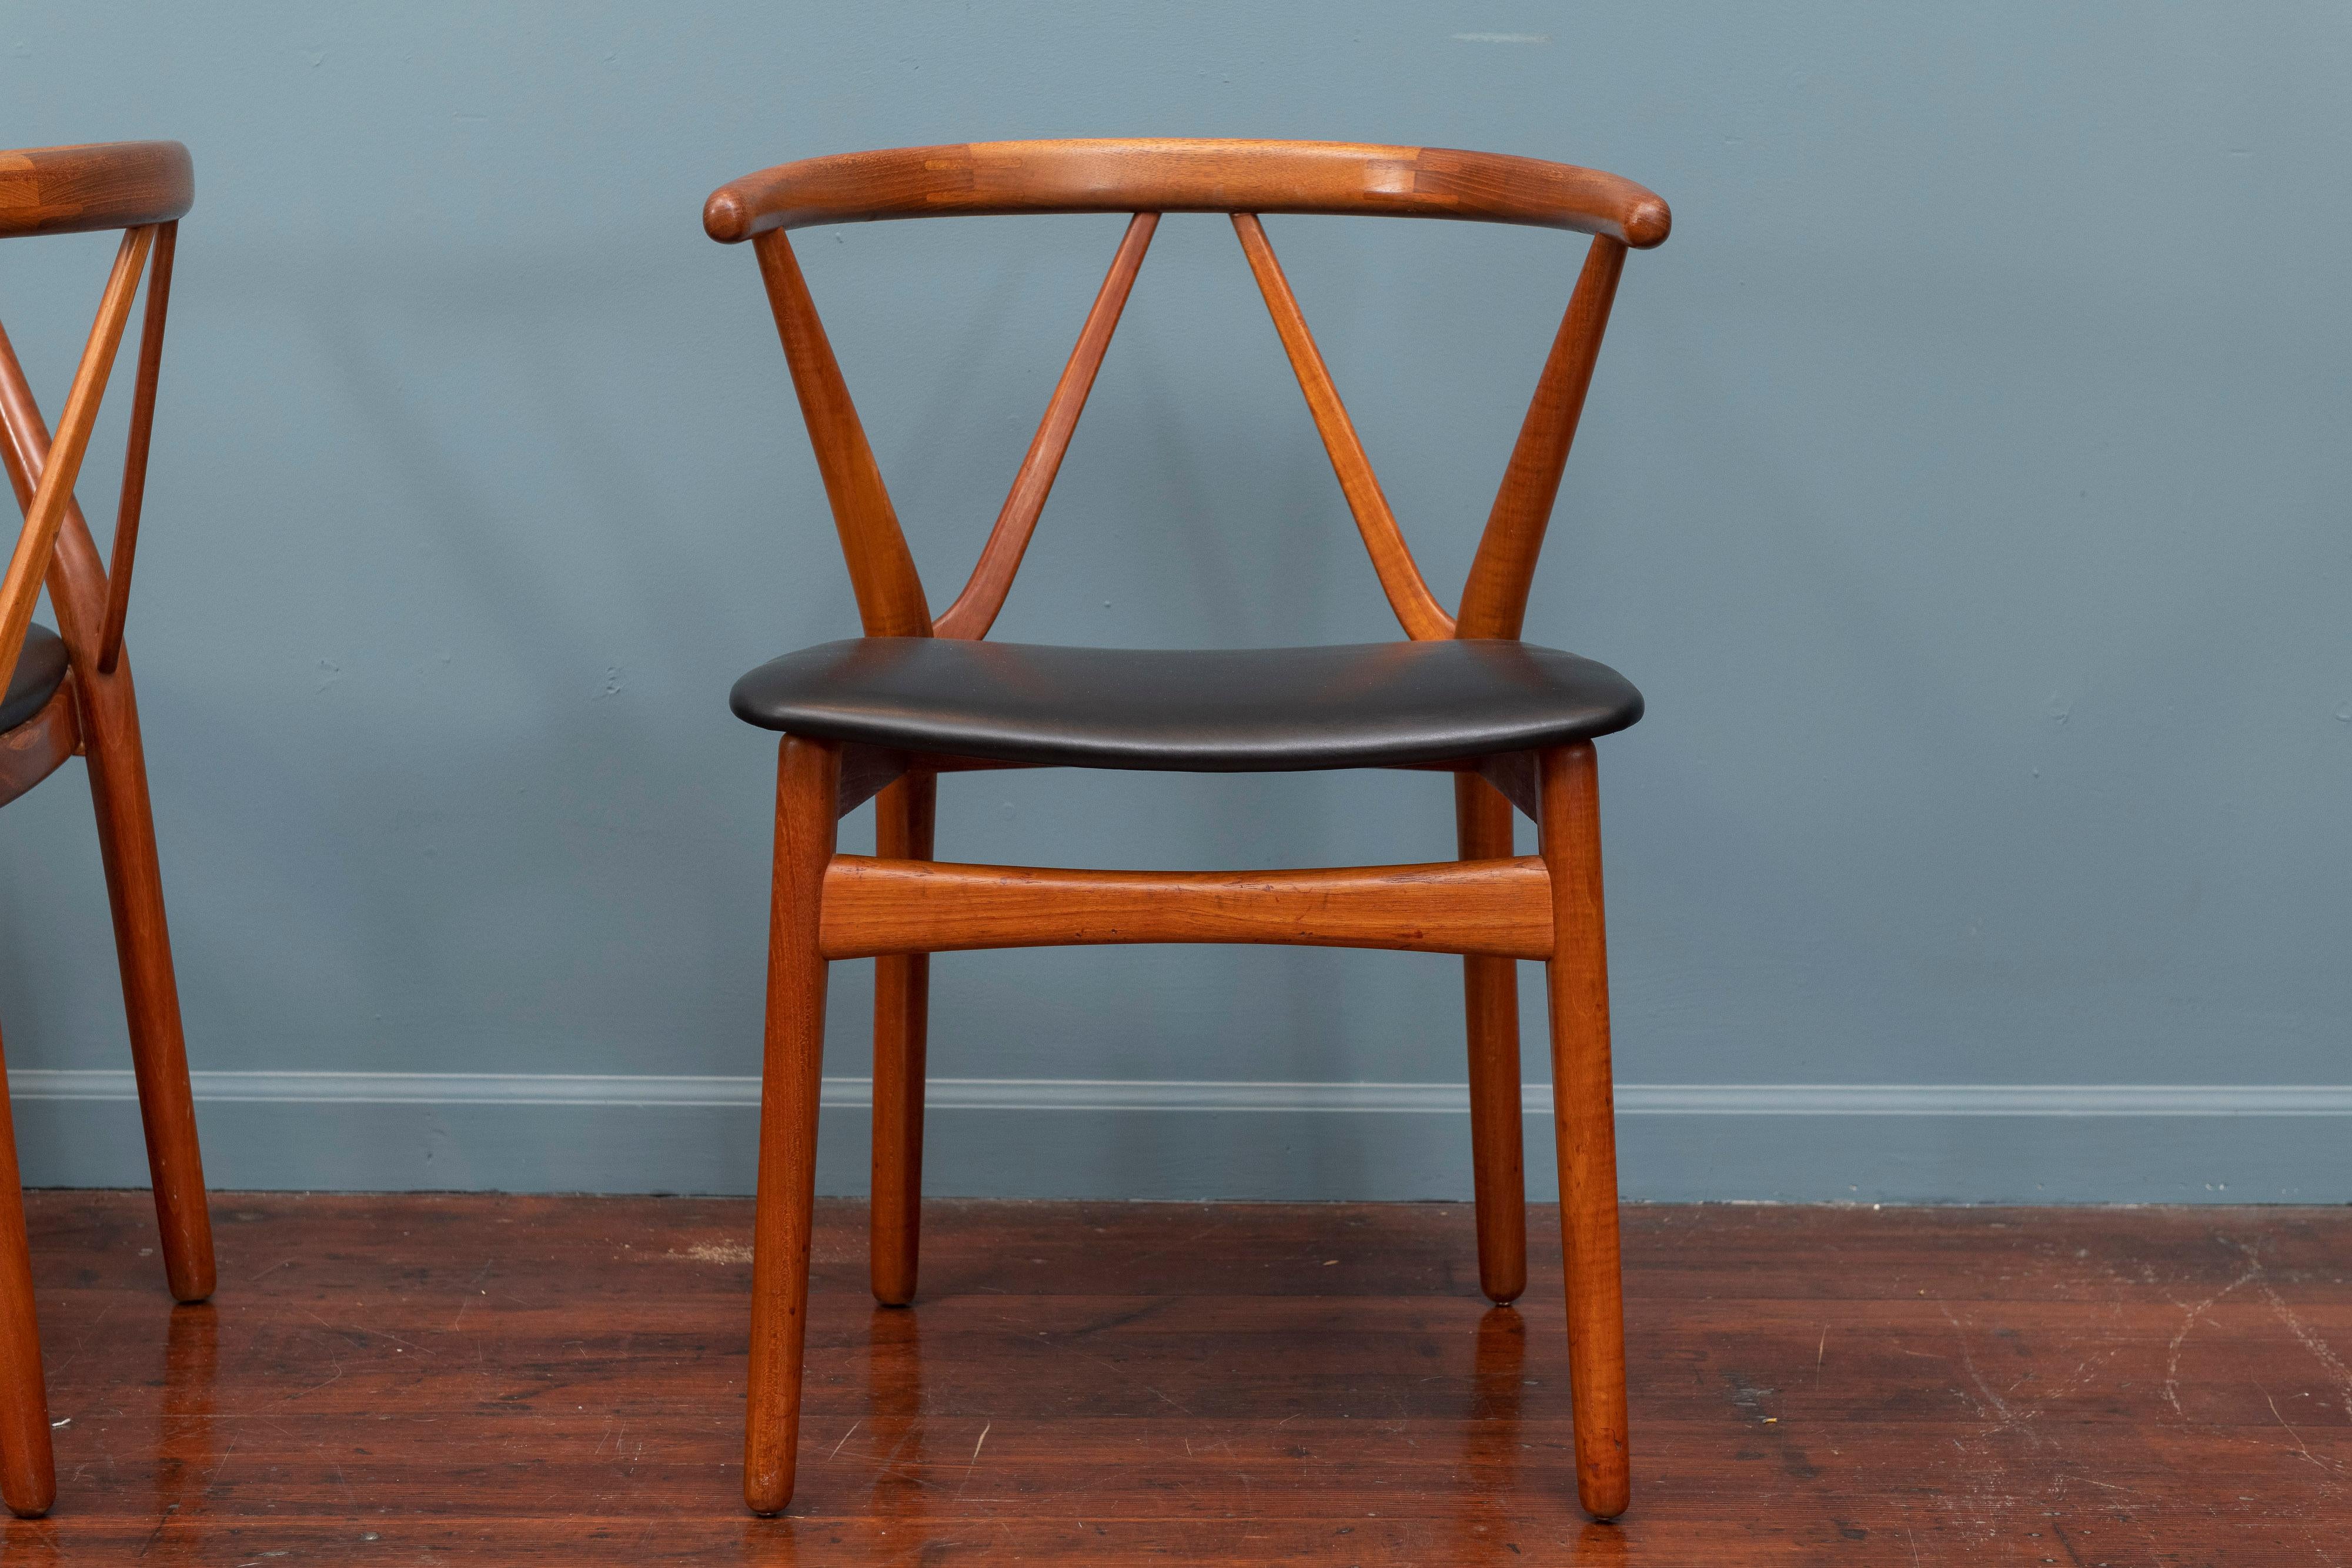 Pair of Scandinavian Modern chairs deigned by Henning Kjaerhulf for Bruno Hansen, Denmark. Newly upholstered in black leather in very good vintage condition.